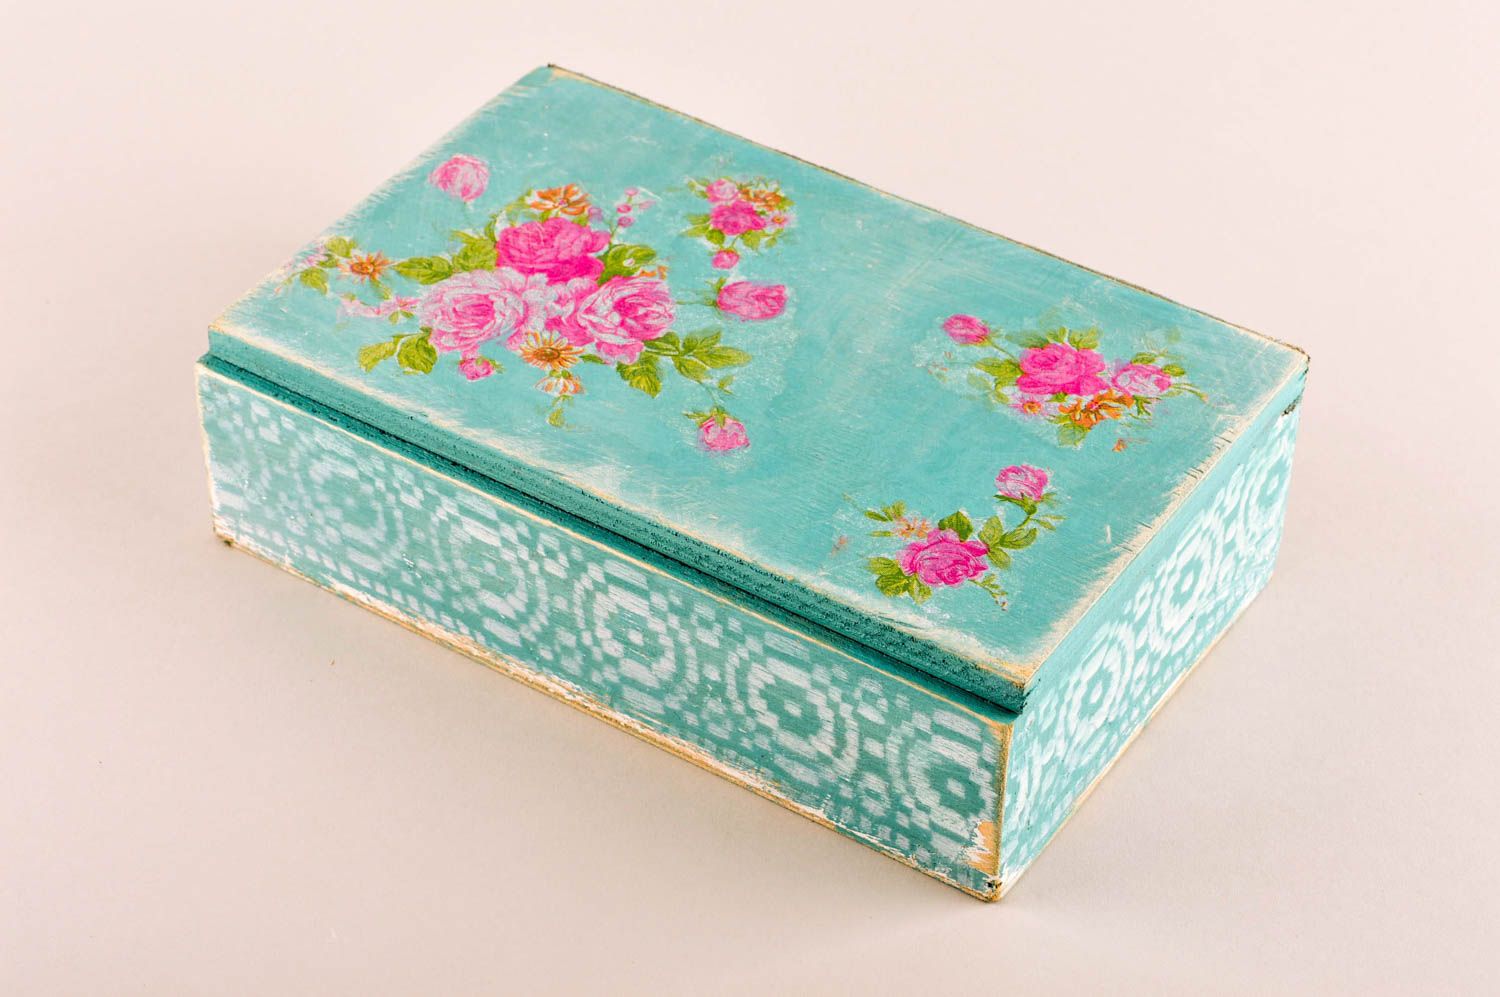 Beautiful handmade wooden box design floral jewelry box best gifts for her photo 2